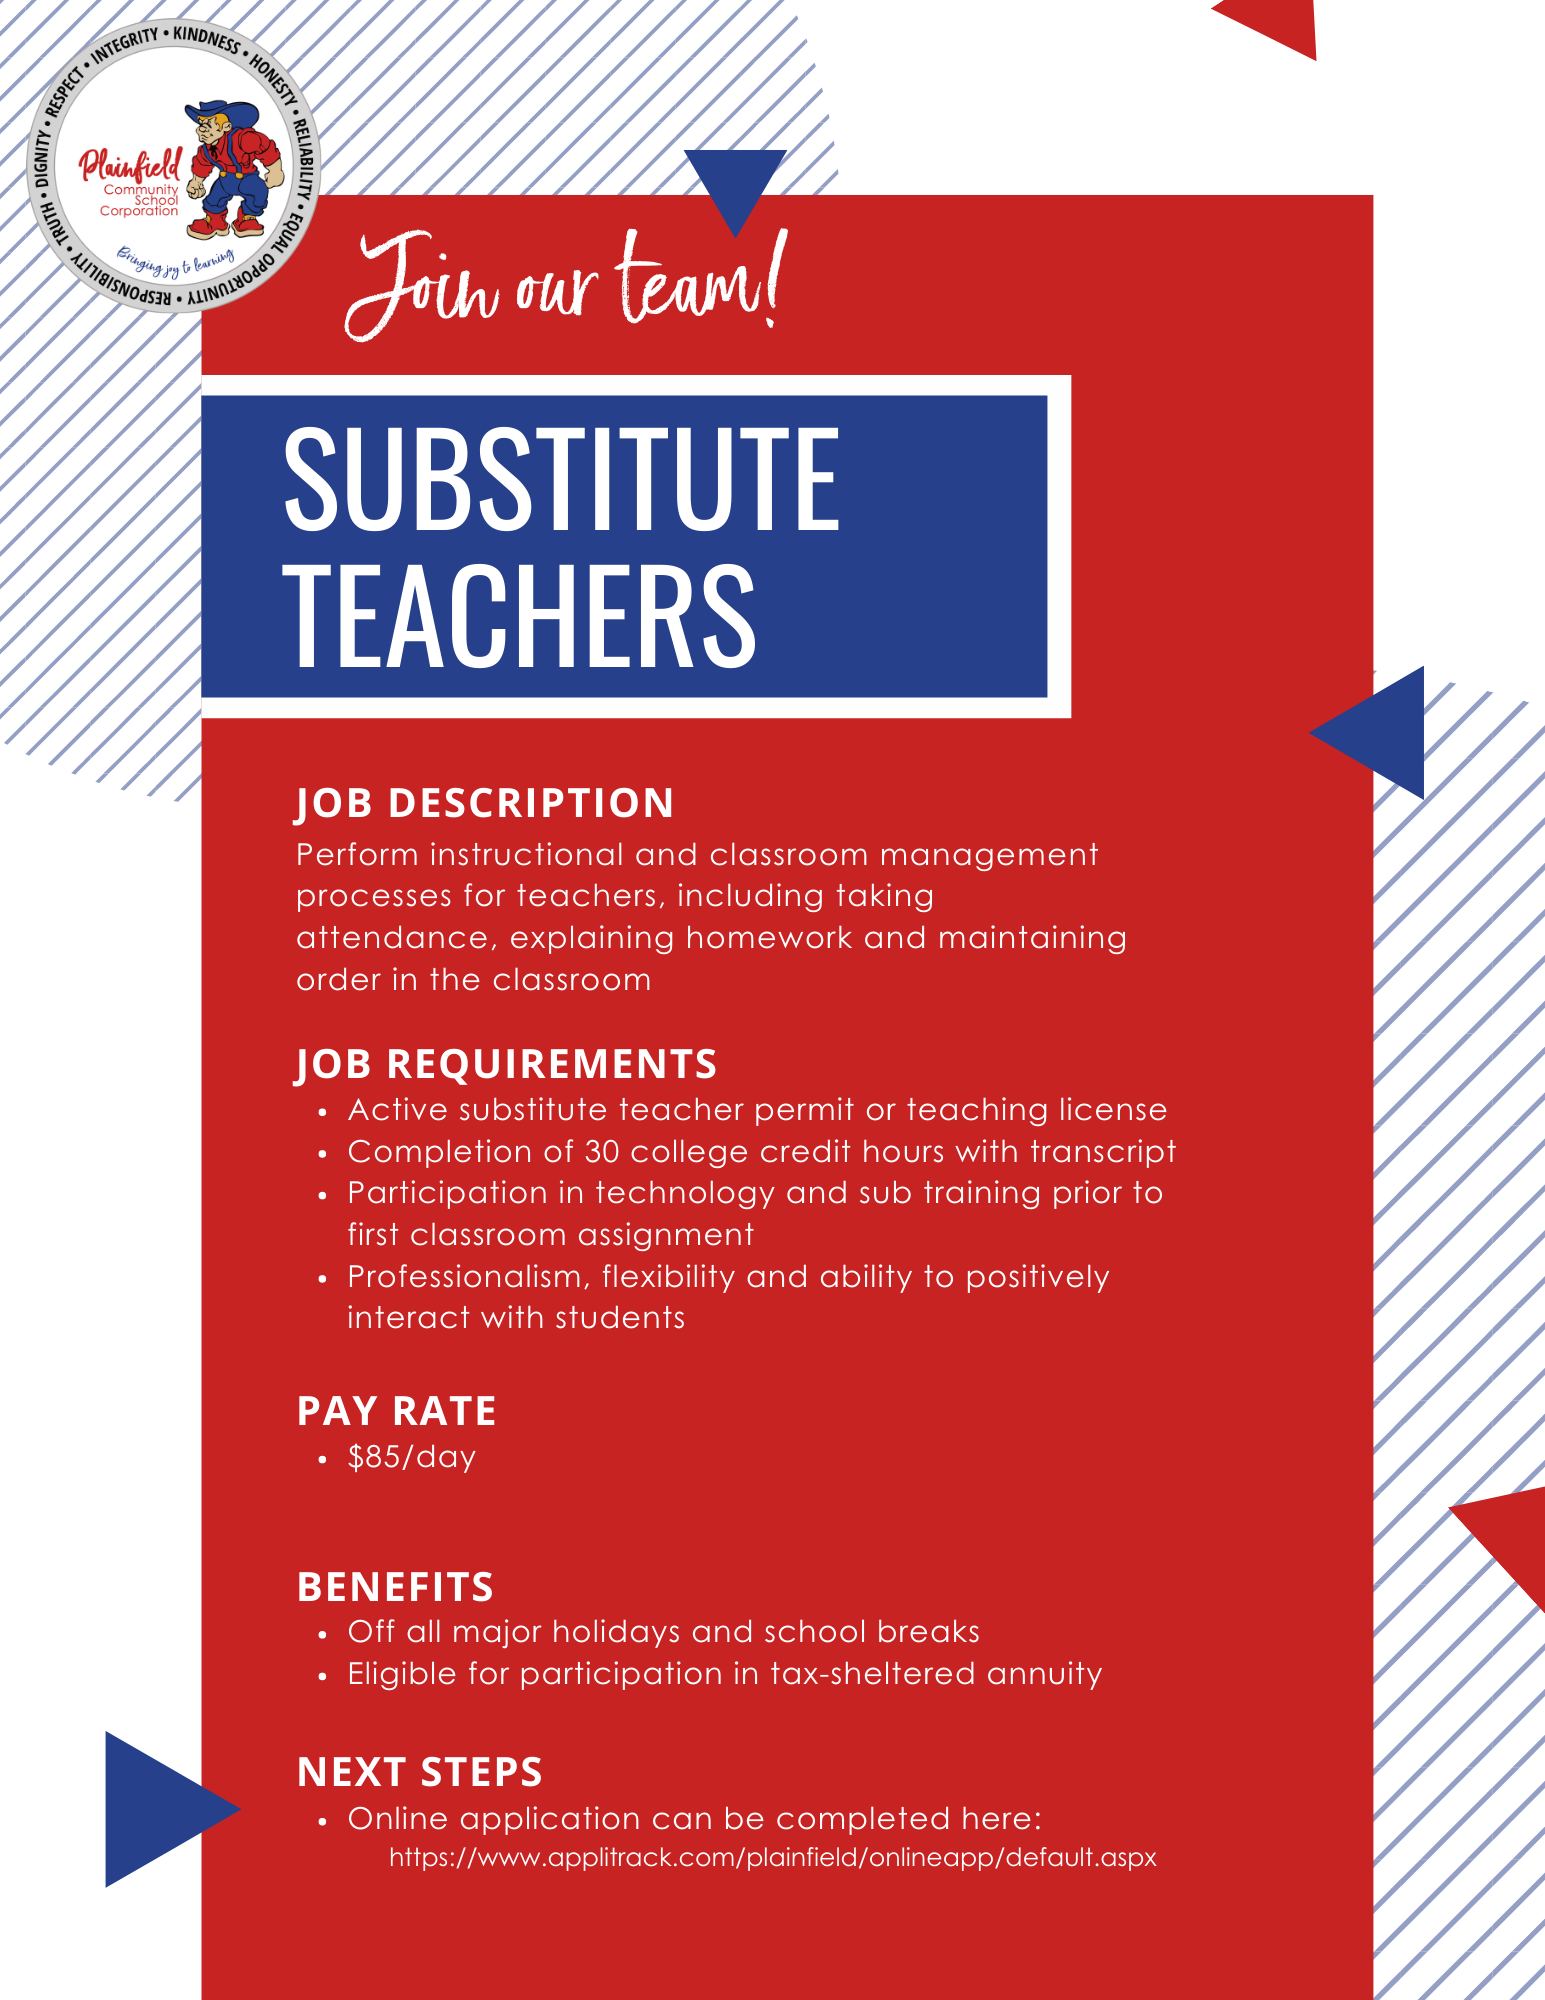 Information about being a substitute teacher in Plainfield Schools